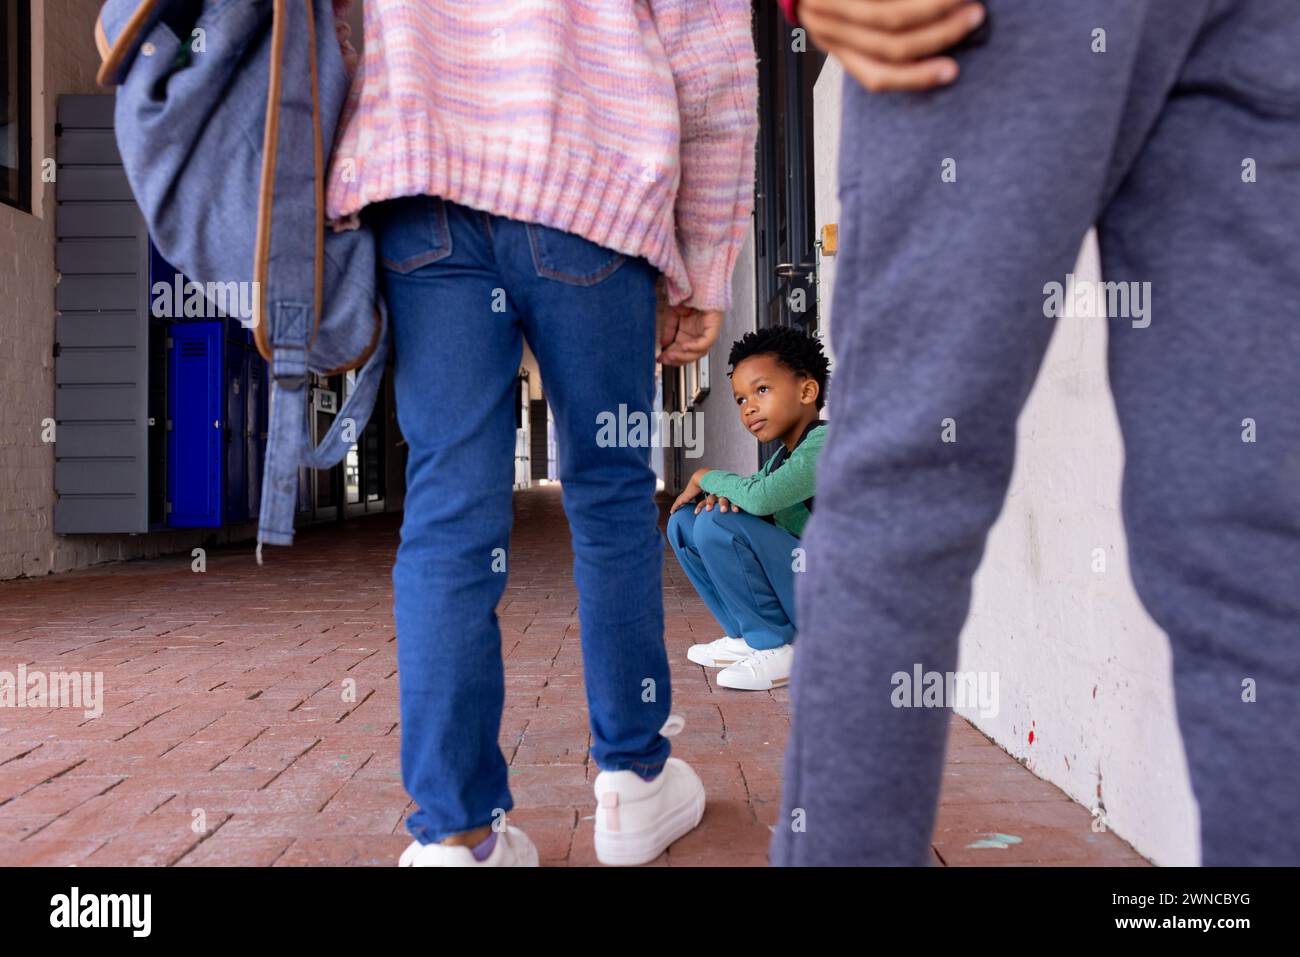 African American boy sits crouched between other children in school, looking sad Stock Photo